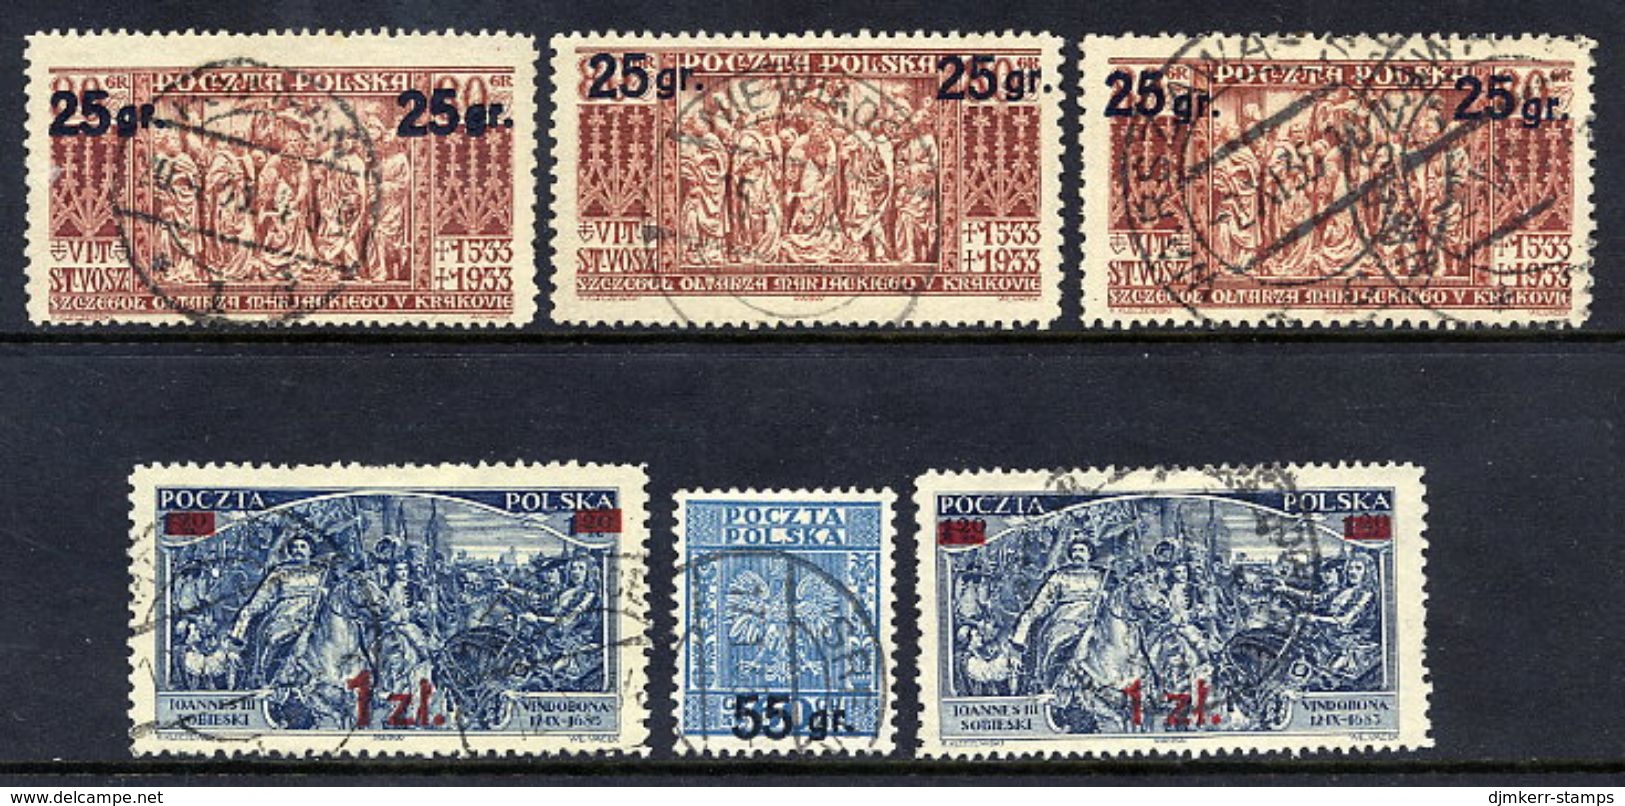 POLAND 1934 Surcharges With All Types, Used.  Michel 291 IA+B, 291 II, 292, 293 I+II - Used Stamps